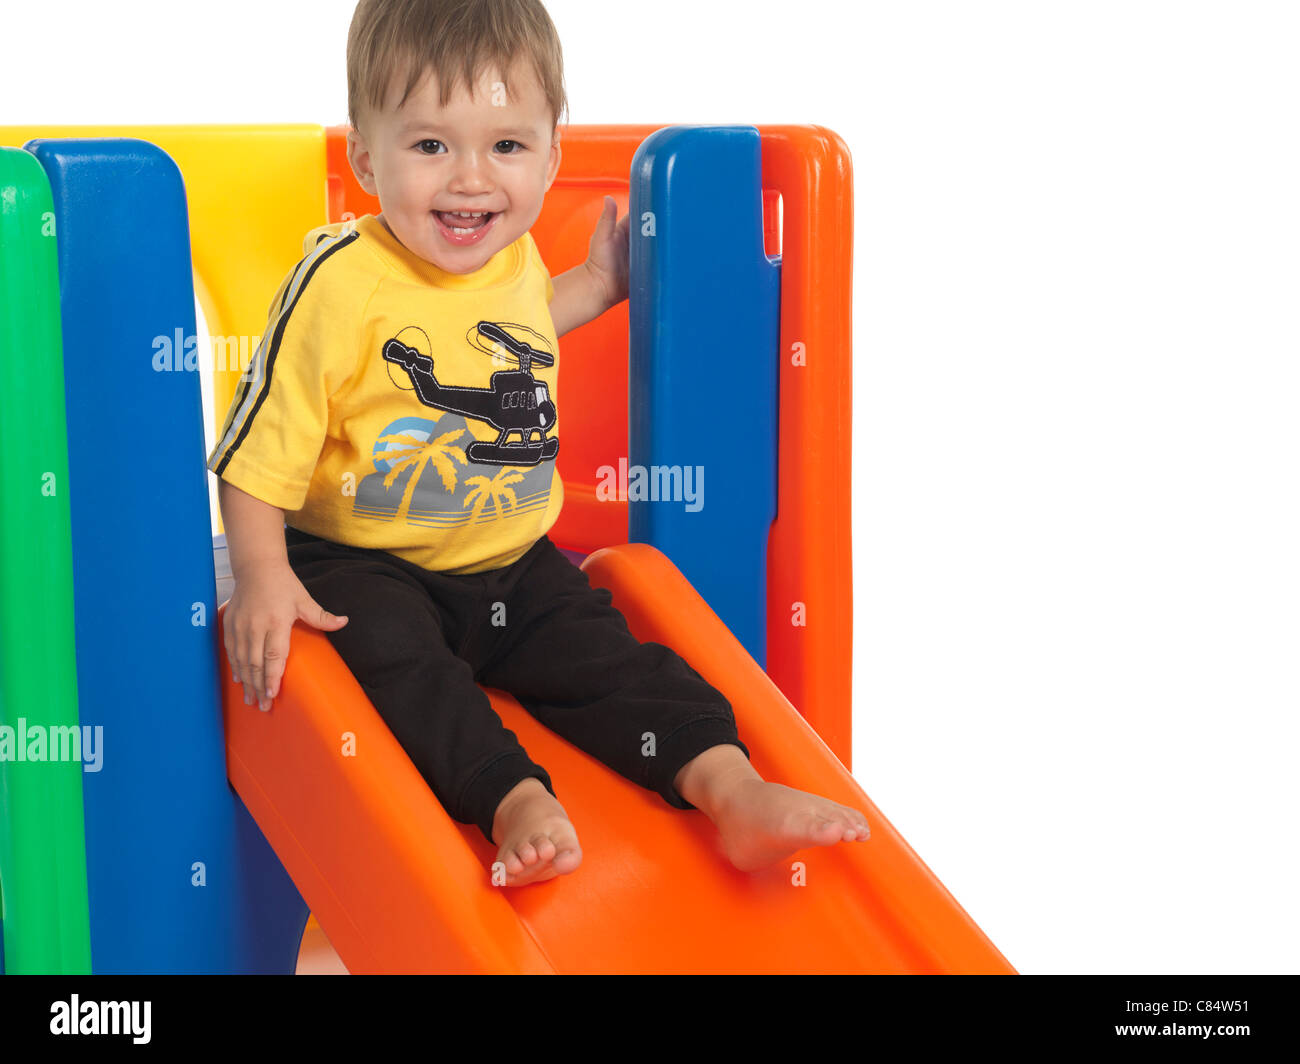 Happy one and a half year old child on a slide. Isolated on white background. Stock Photo